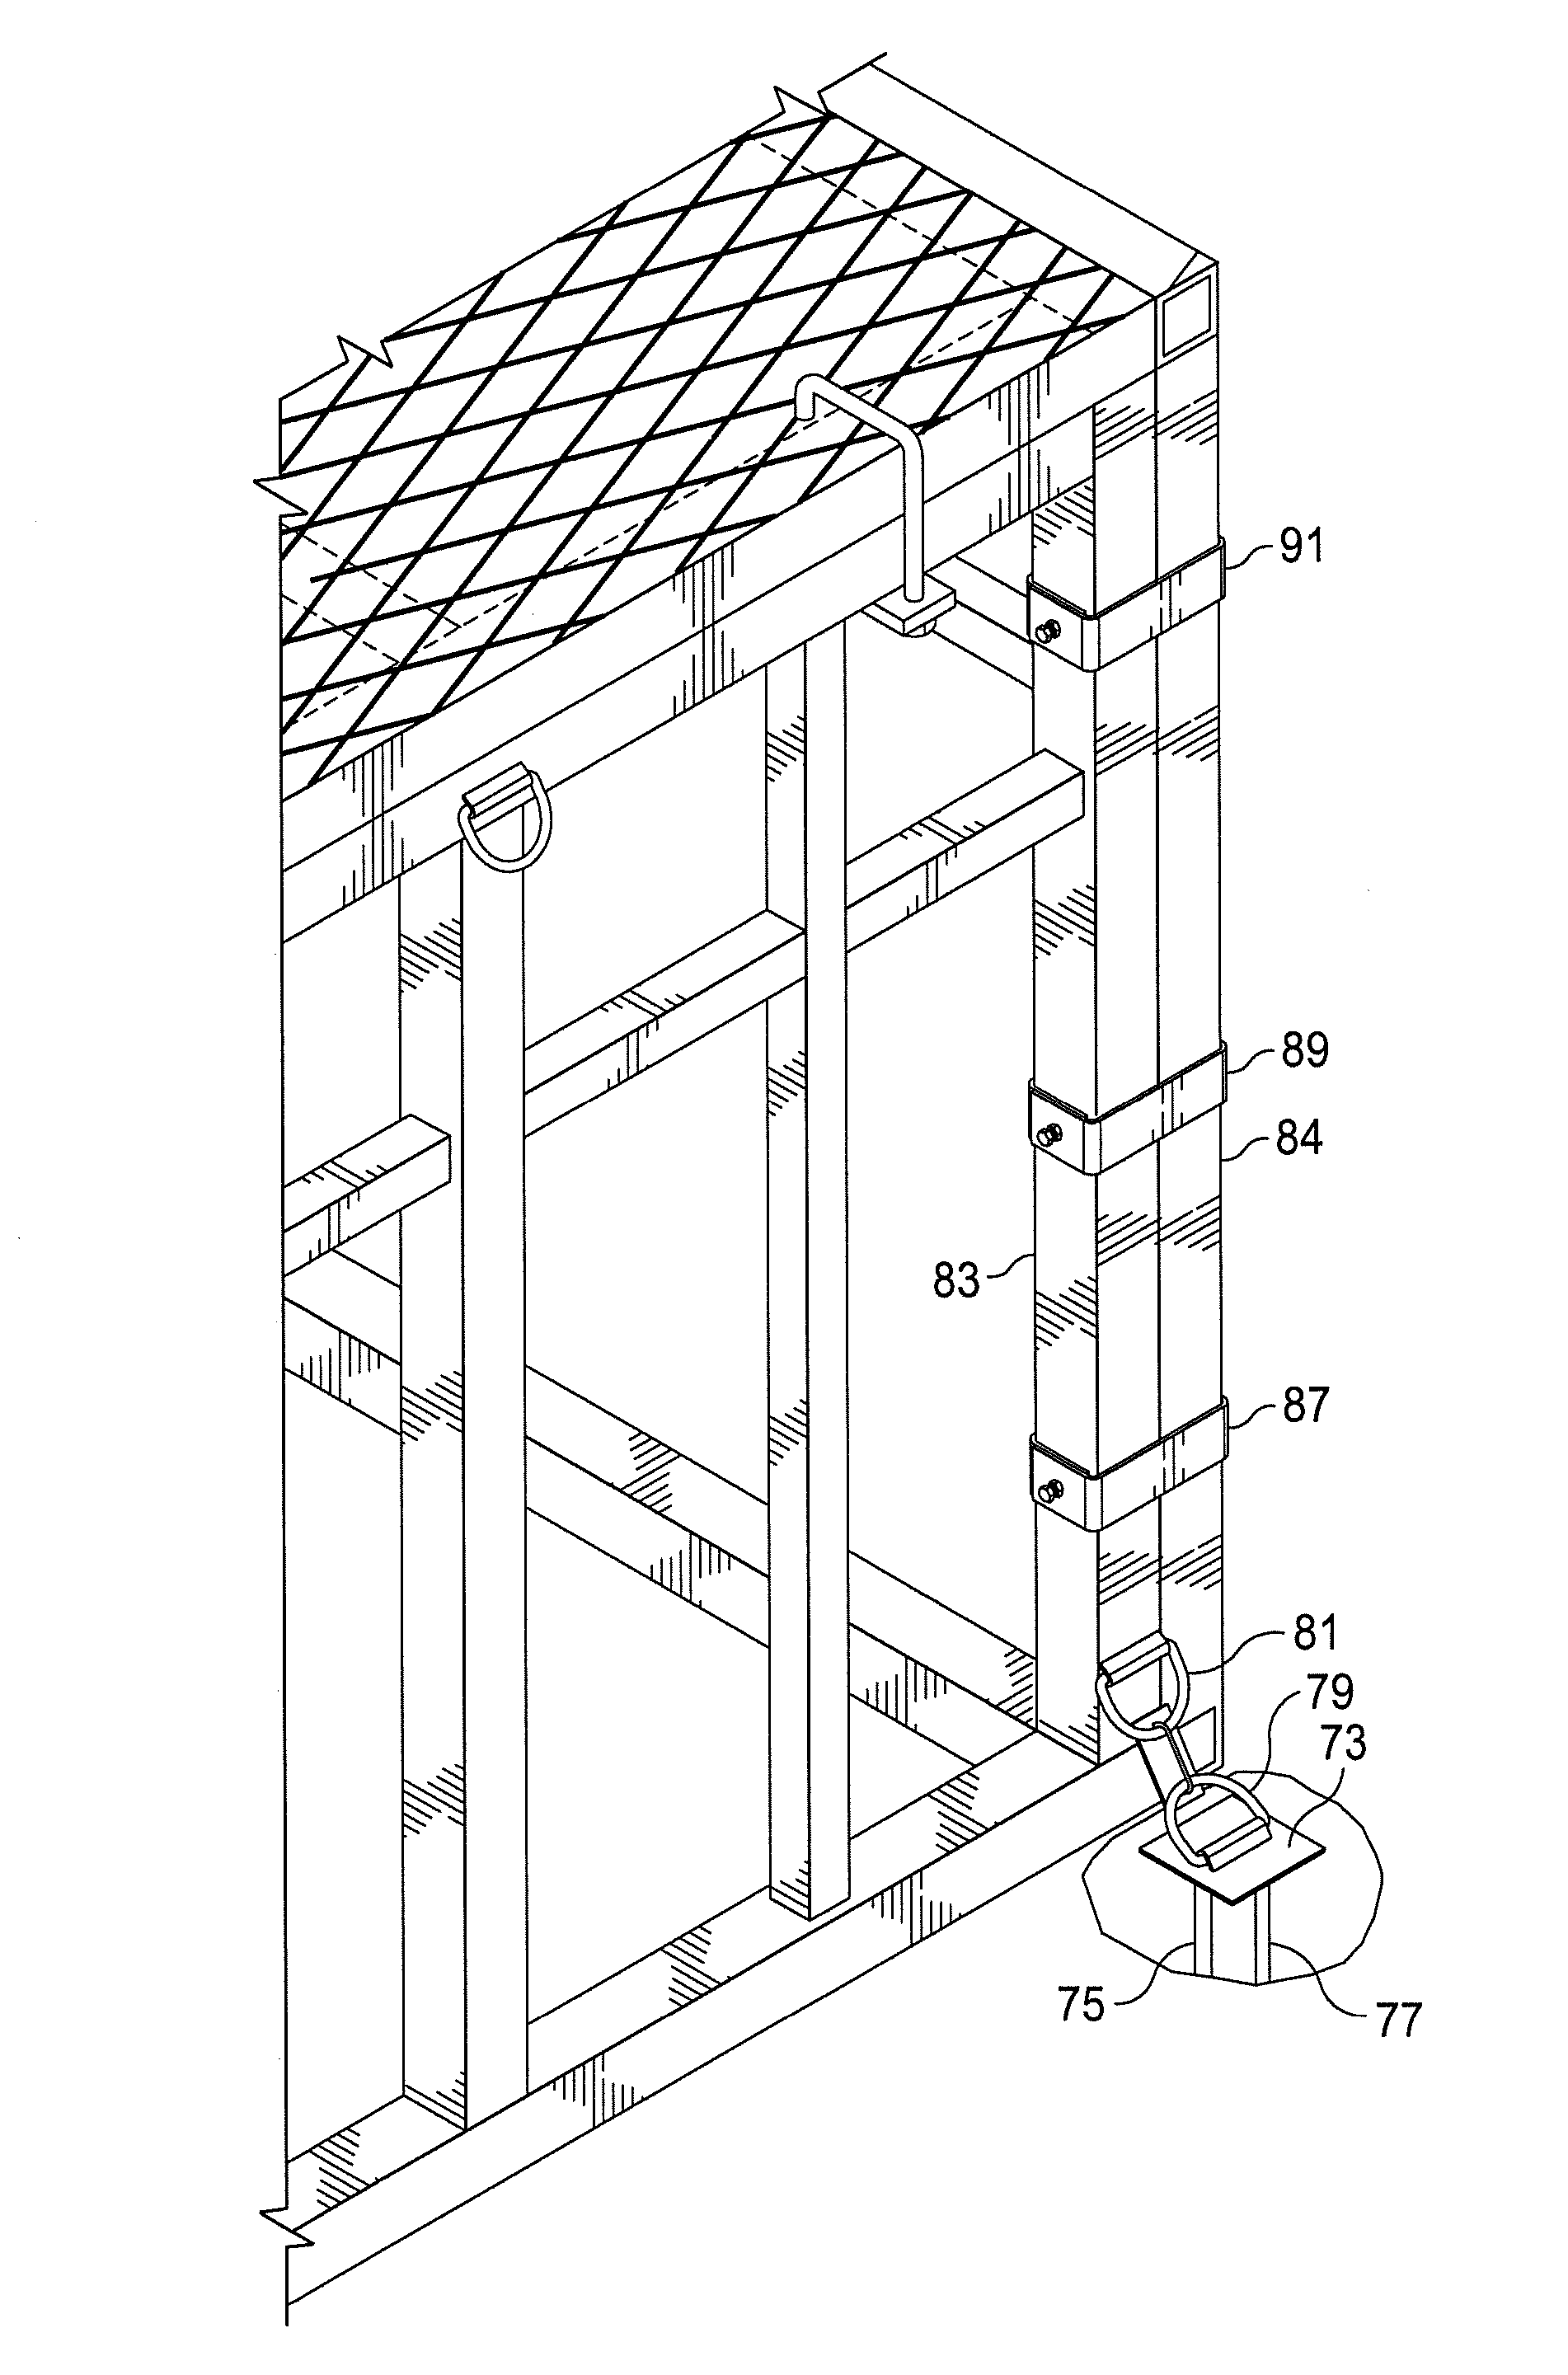 Protective enclosure for a wellhead